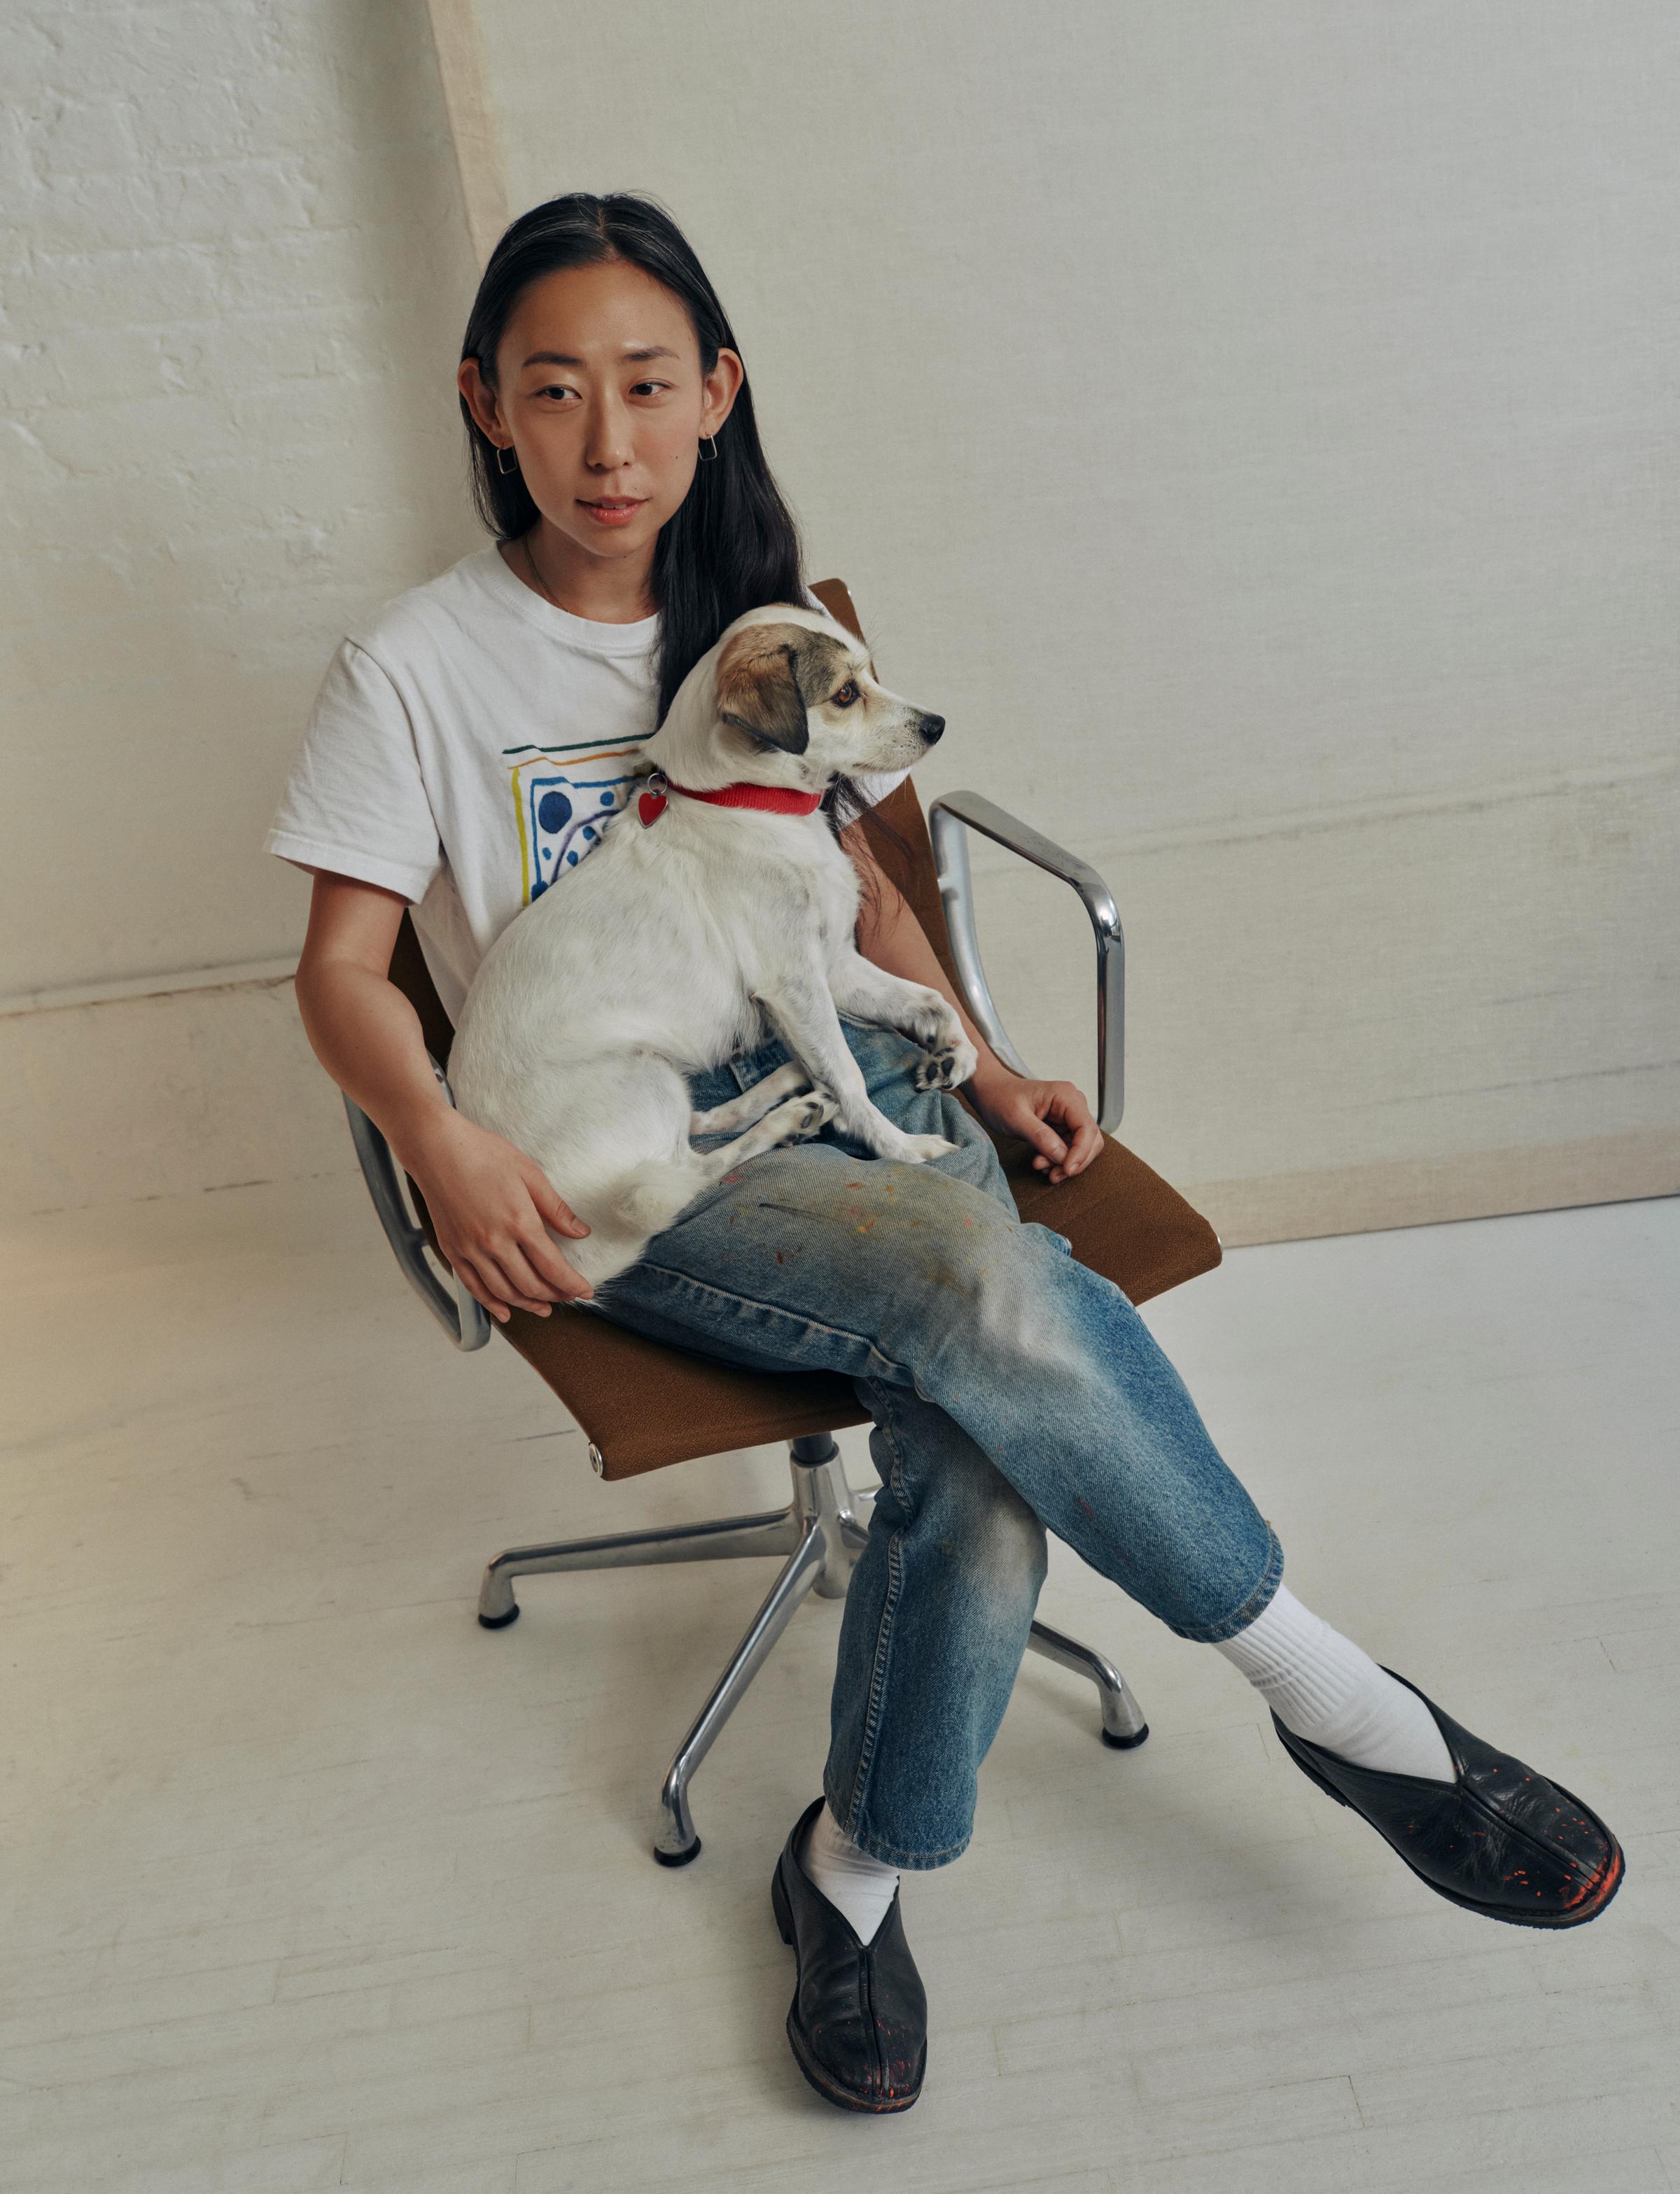 Artist Na Kim is sitting on a chair with her dog.